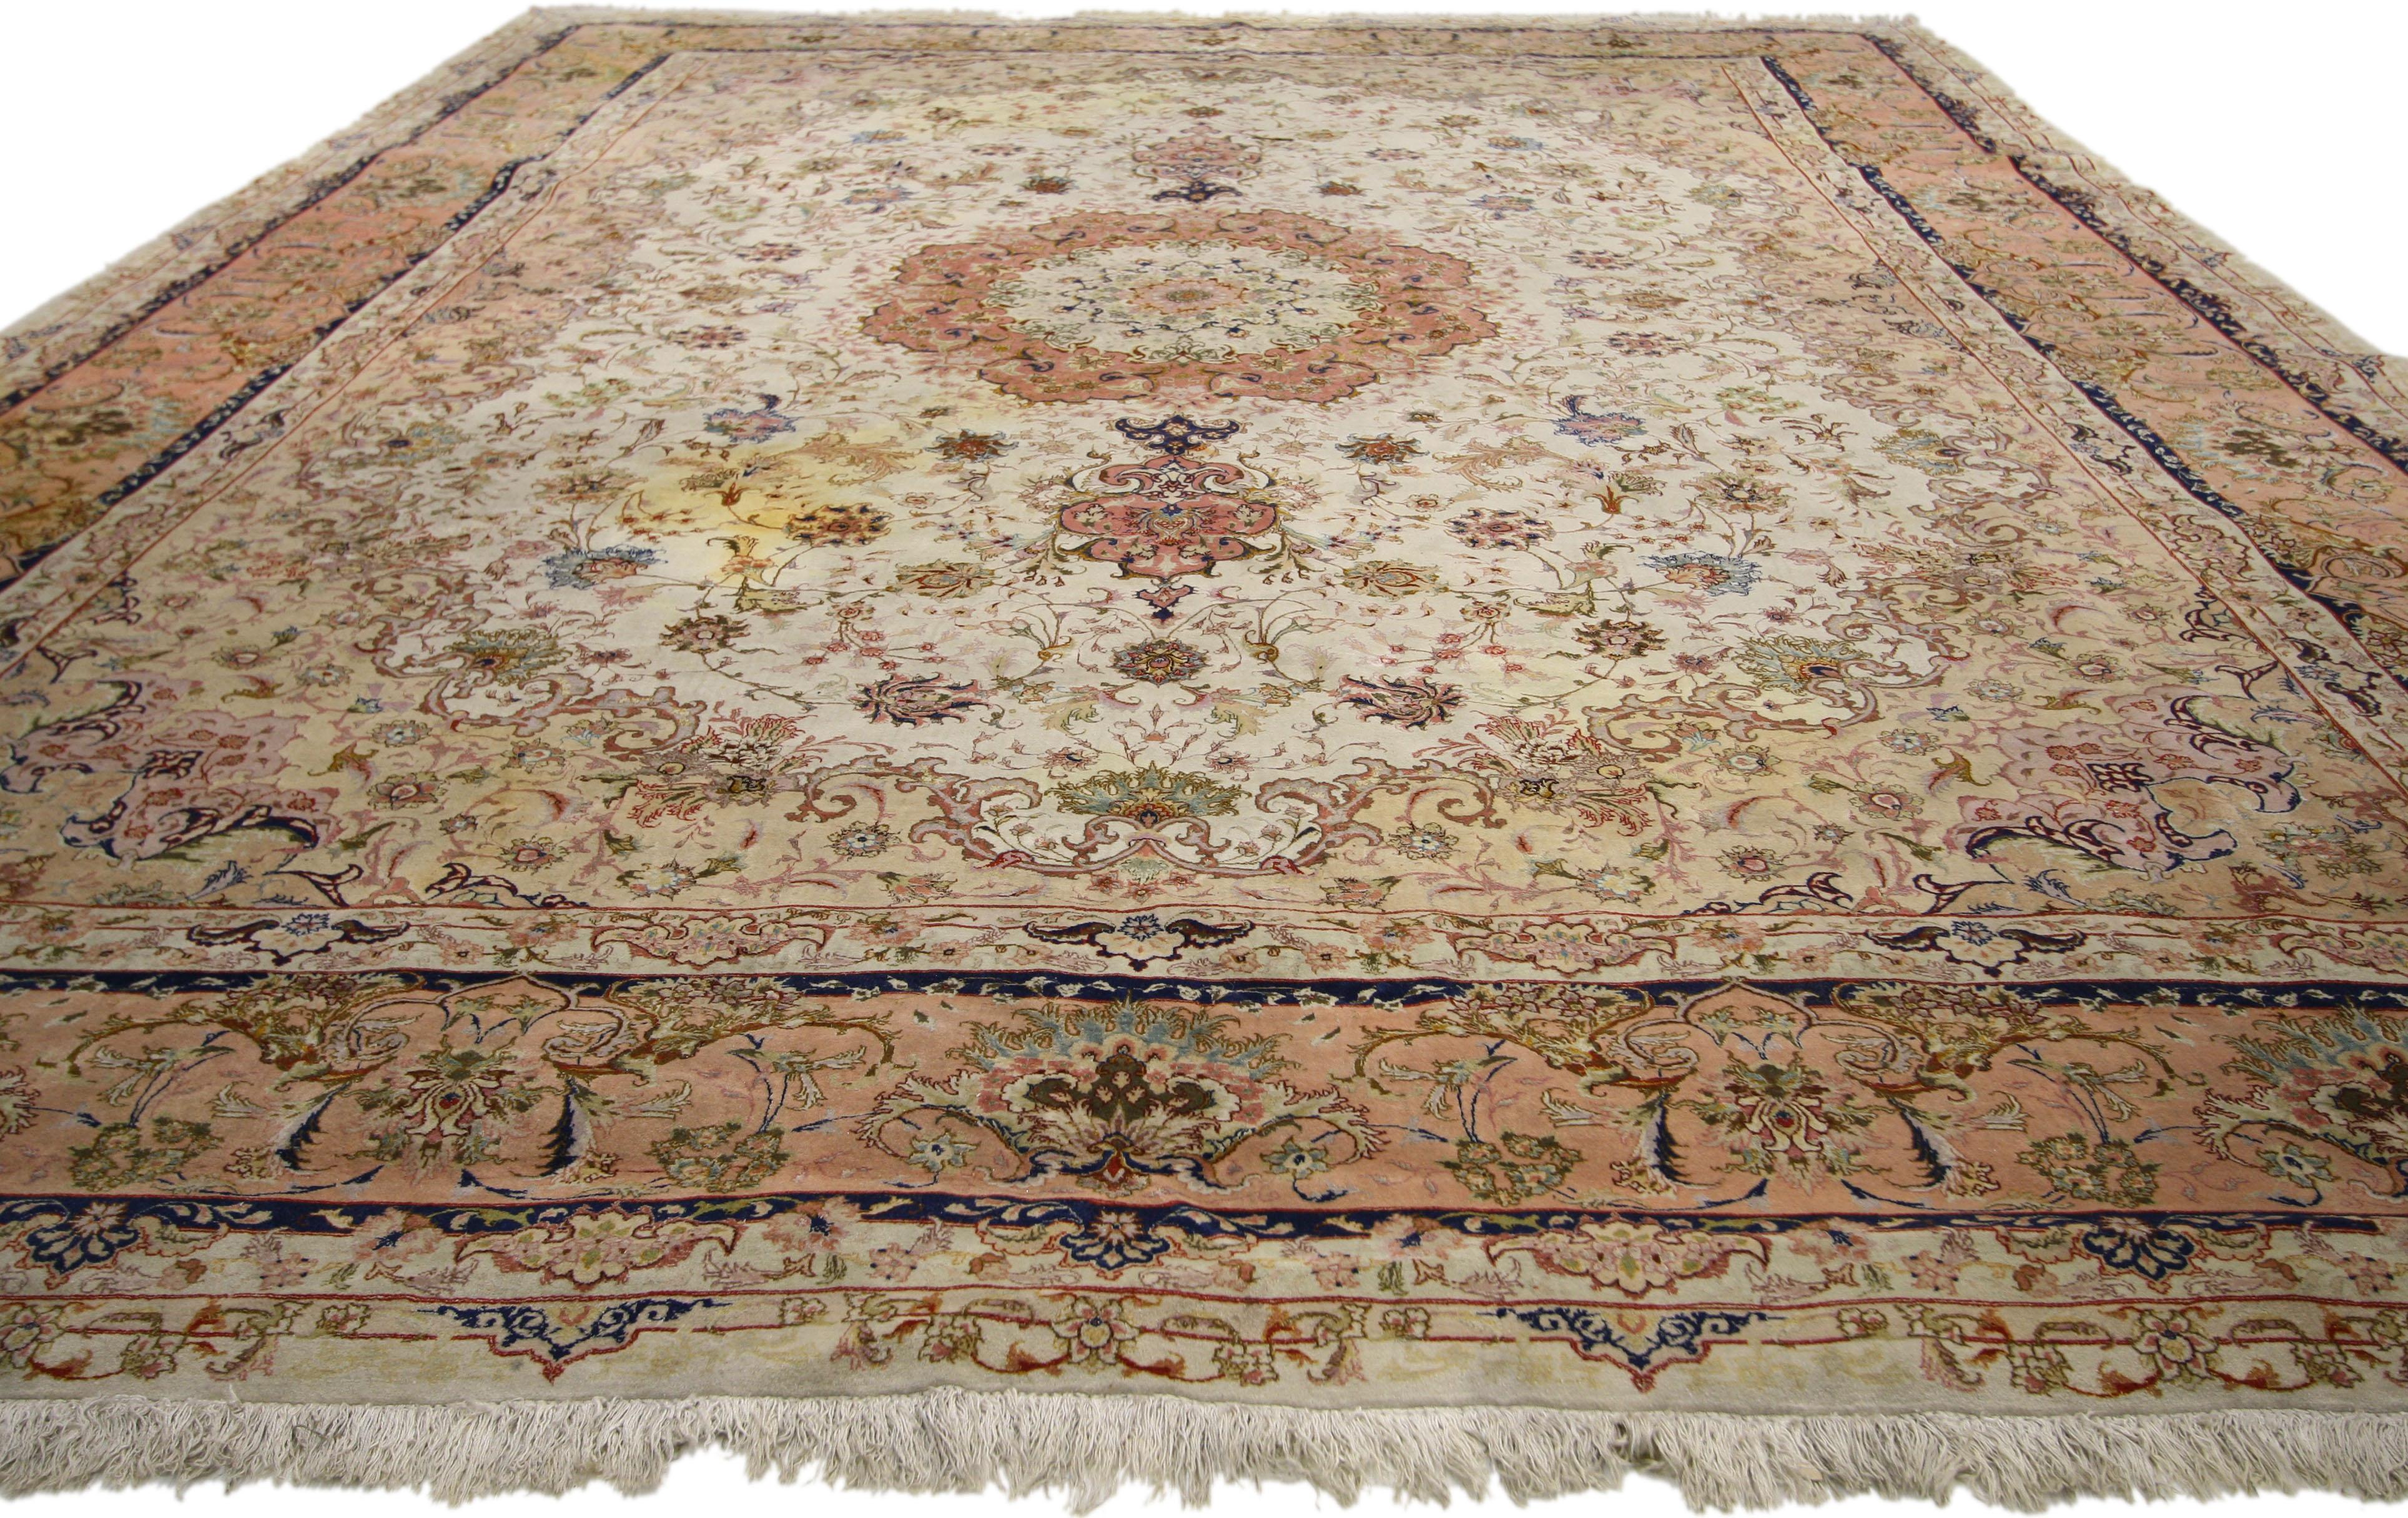 Vintage Persian Wool and Silk Tabriz Rug In Good Condition For Sale In Dallas, TX